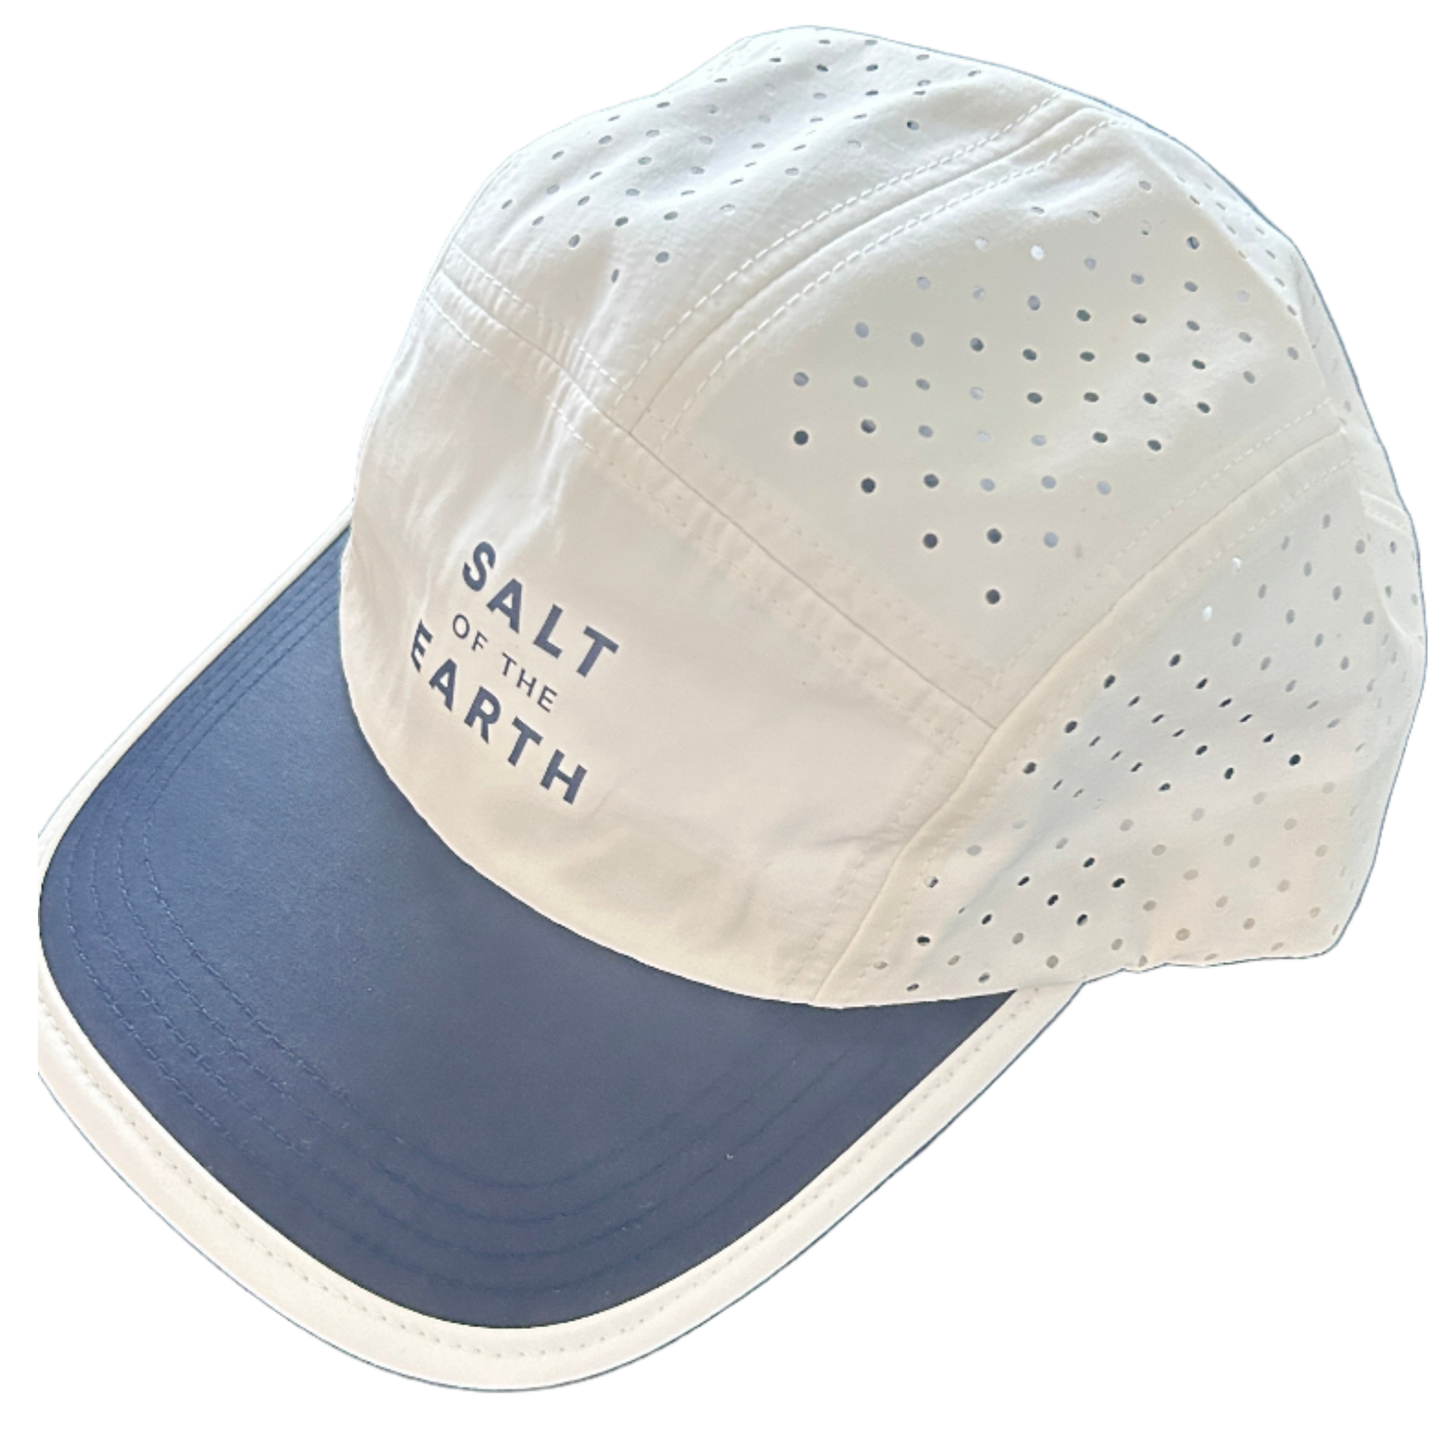 Salt of the Earth Performance Hat